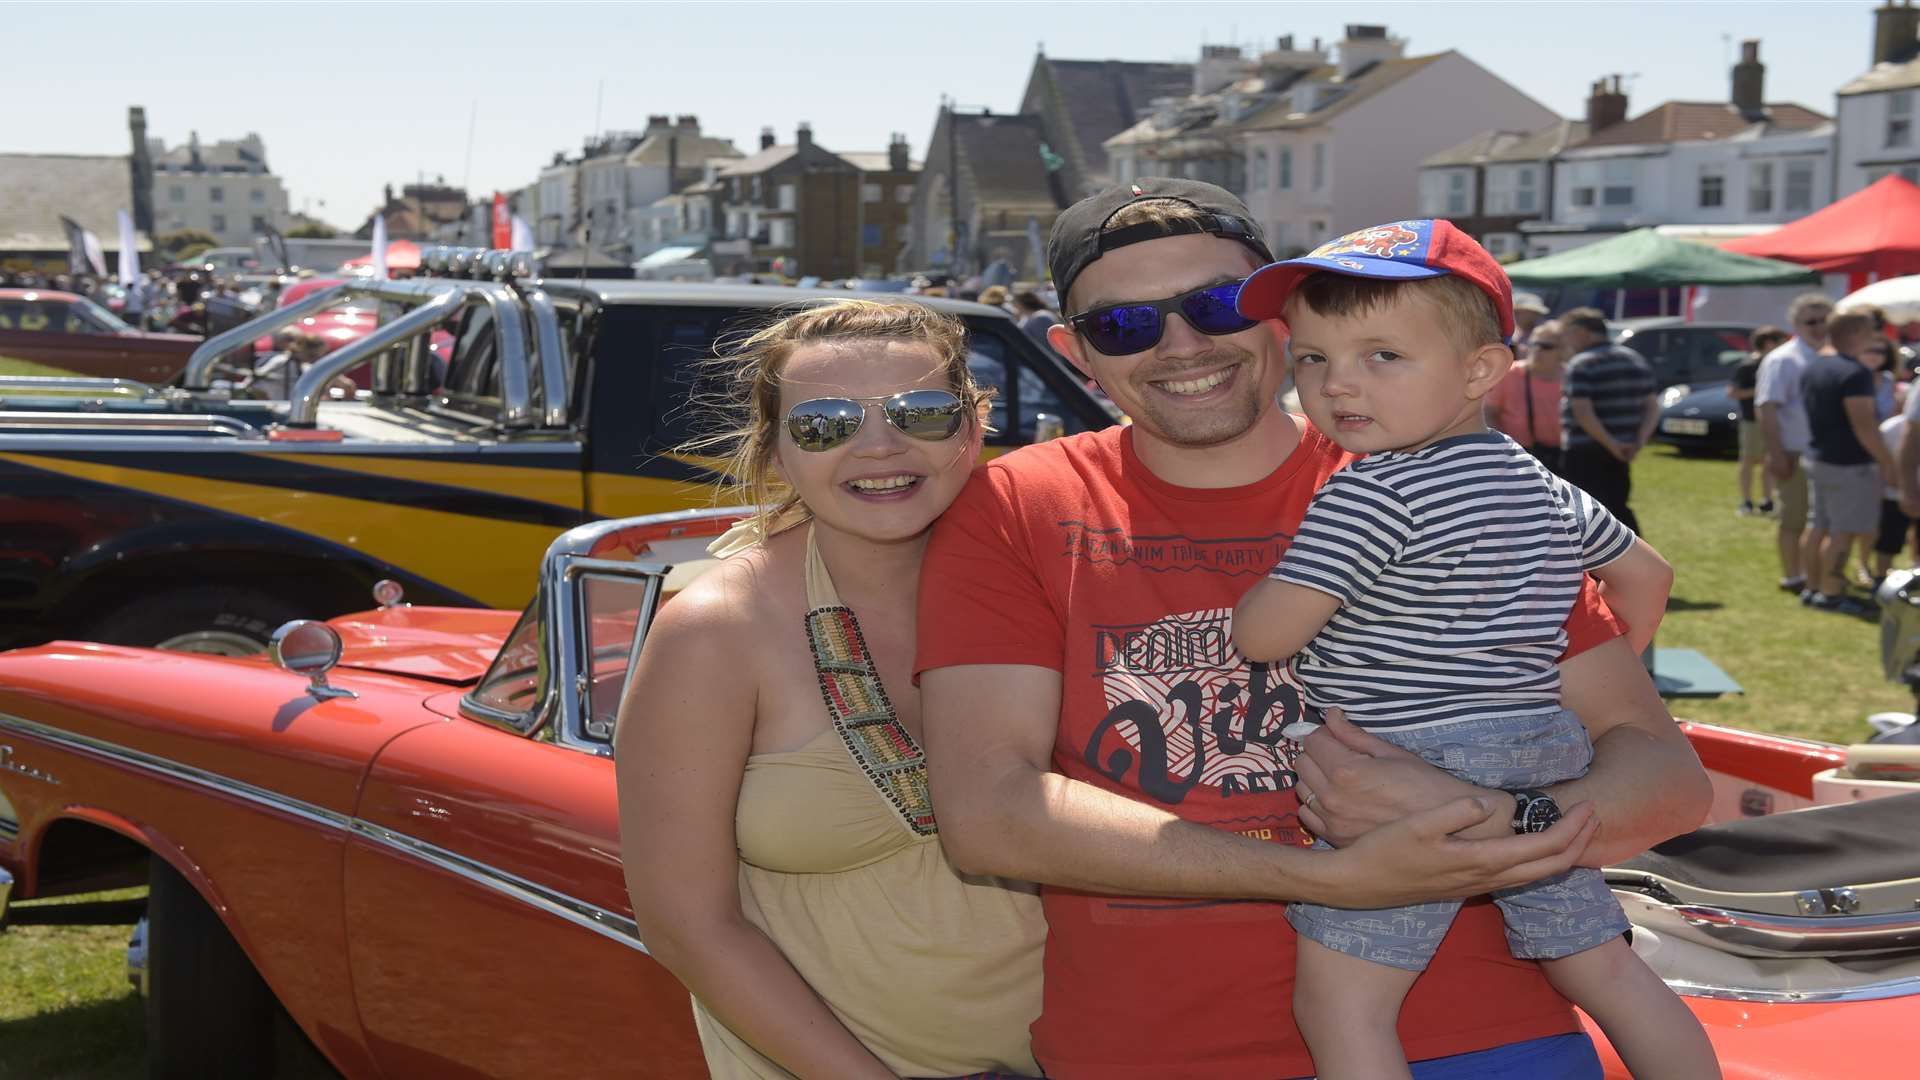 The Burridge family, Justina, Gary and two year old Josh at Deal Classic Motor Show